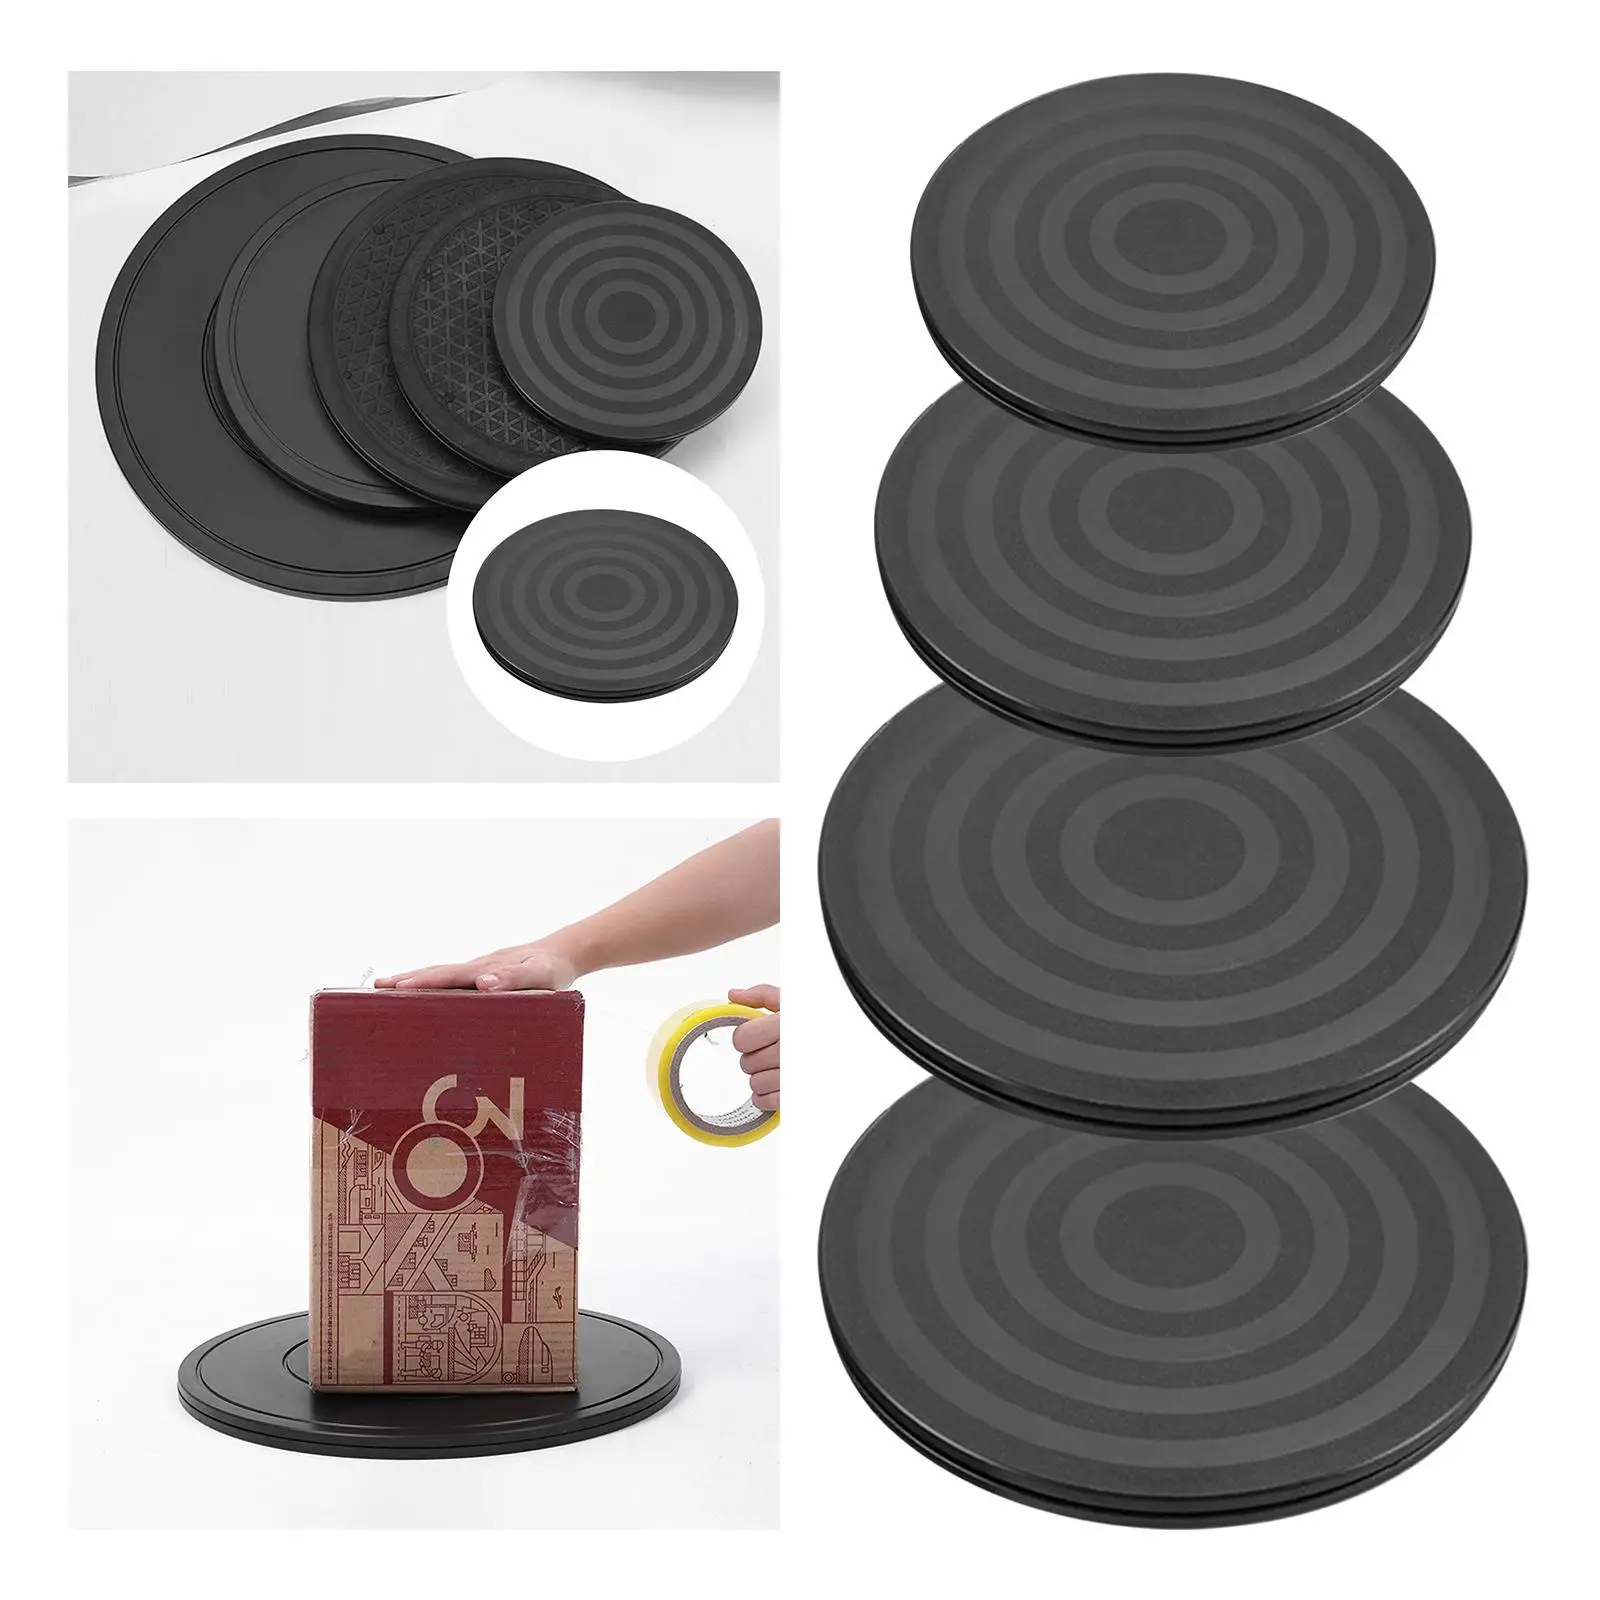 Flexible Rotation Stand 360 Degree Heavy Duty Tray Platform Turntable Display Stand for TV Cabinets Plants Pottery Wheel Model